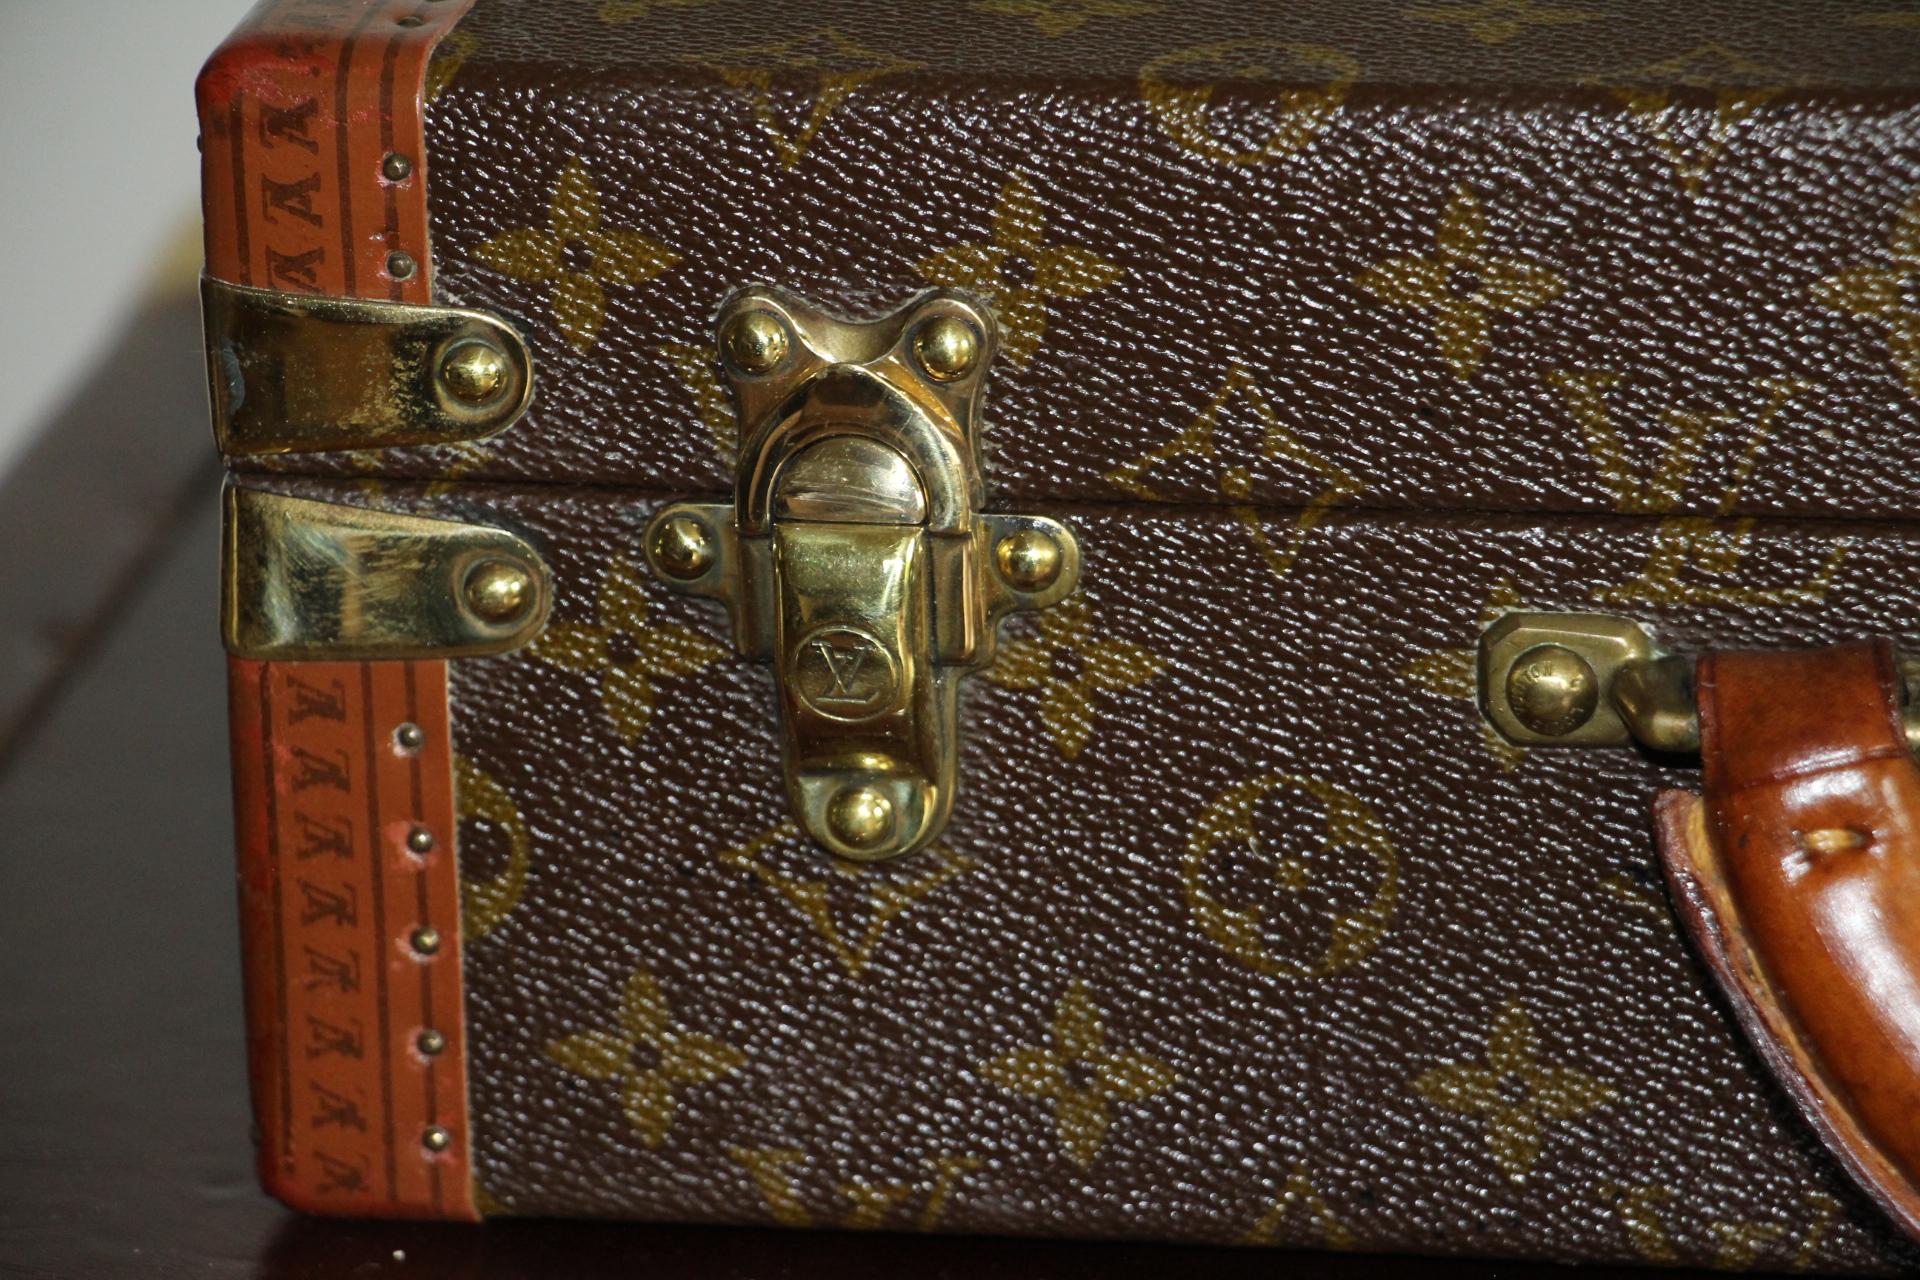 This elegant Louis Vuitton briefcase features monogram canvas and a comfortable leather handle. Closed by a solid brass lock, it is accompanied by two crafted brass trunk latches. Its trims are printed with the LV logo all around.
Its interior is